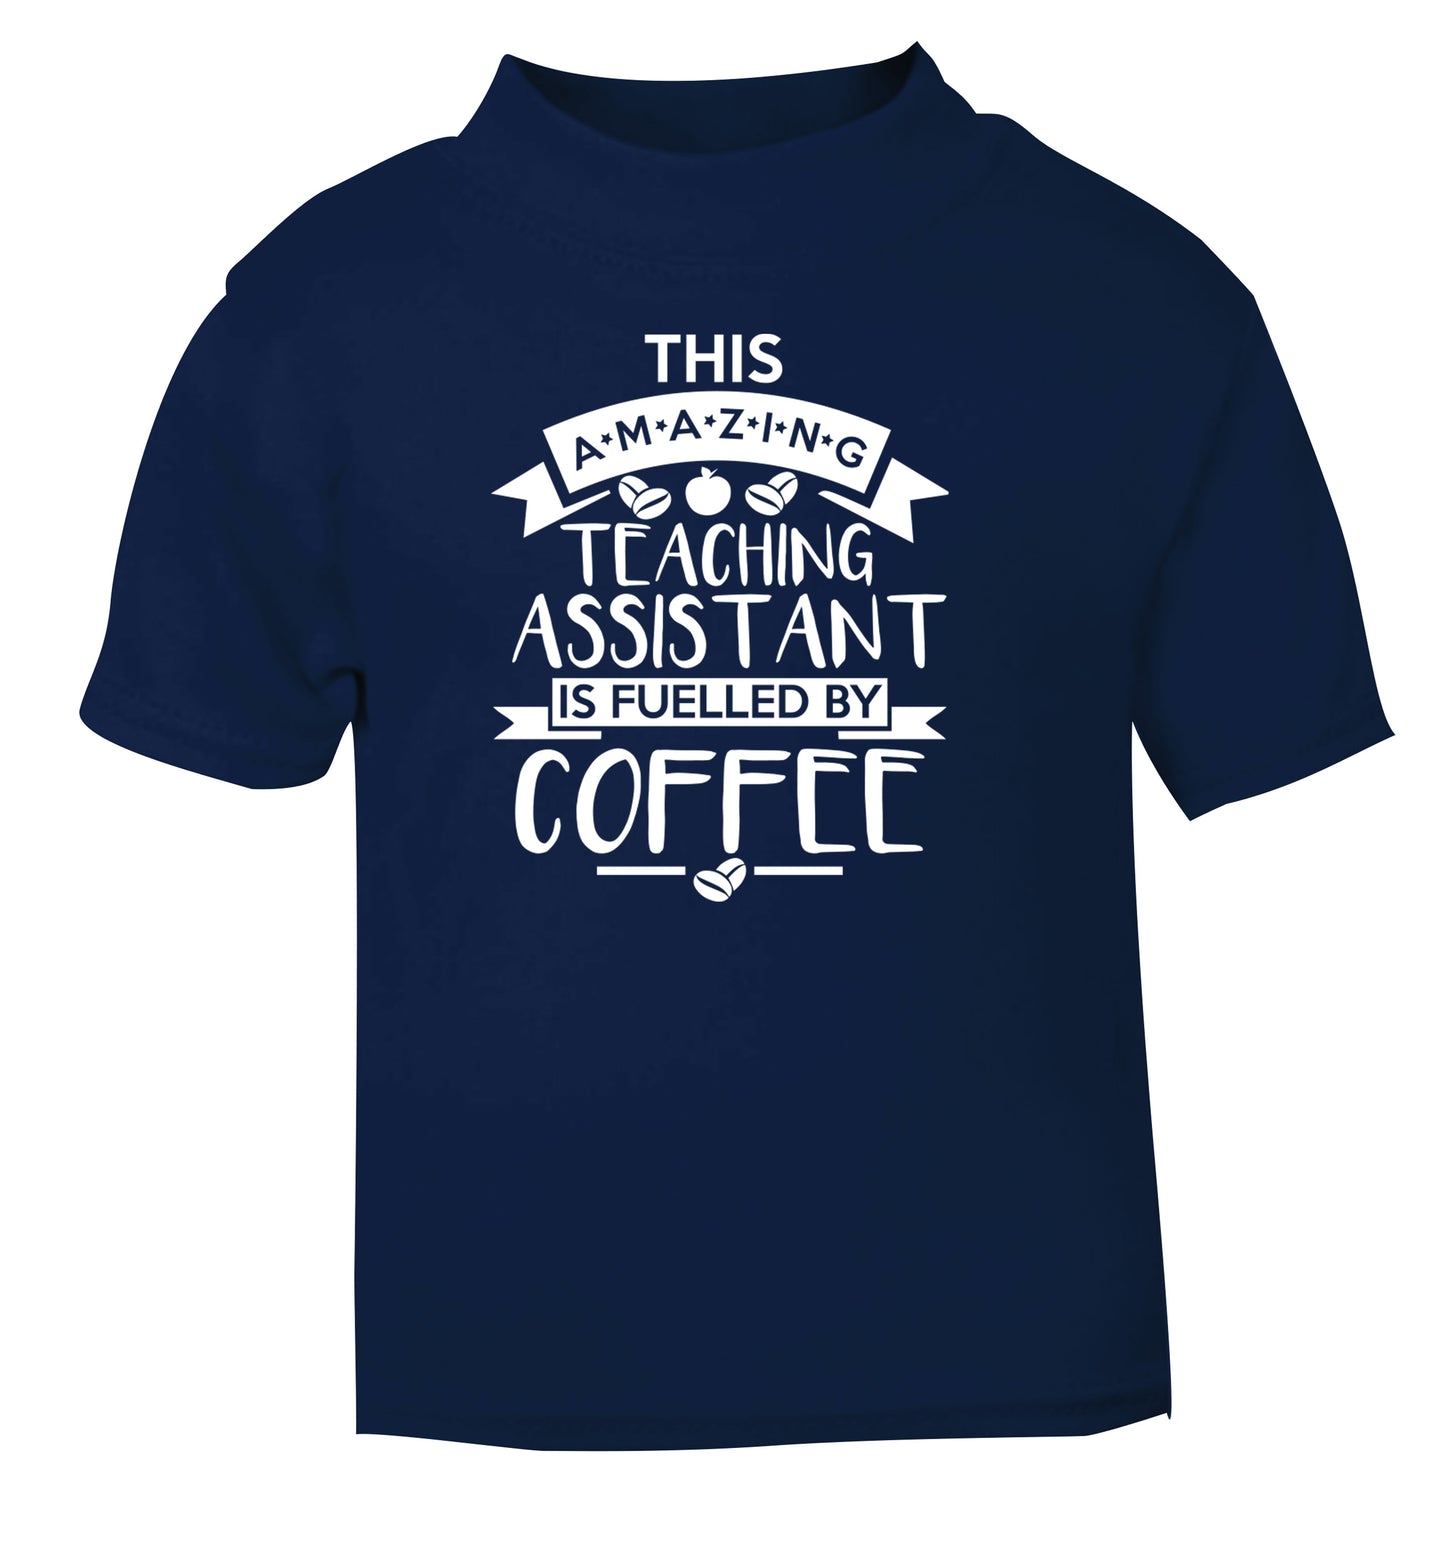 This amazing teaching assistant is fuelled by coffee navy Baby Toddler Tshirt 2 Years